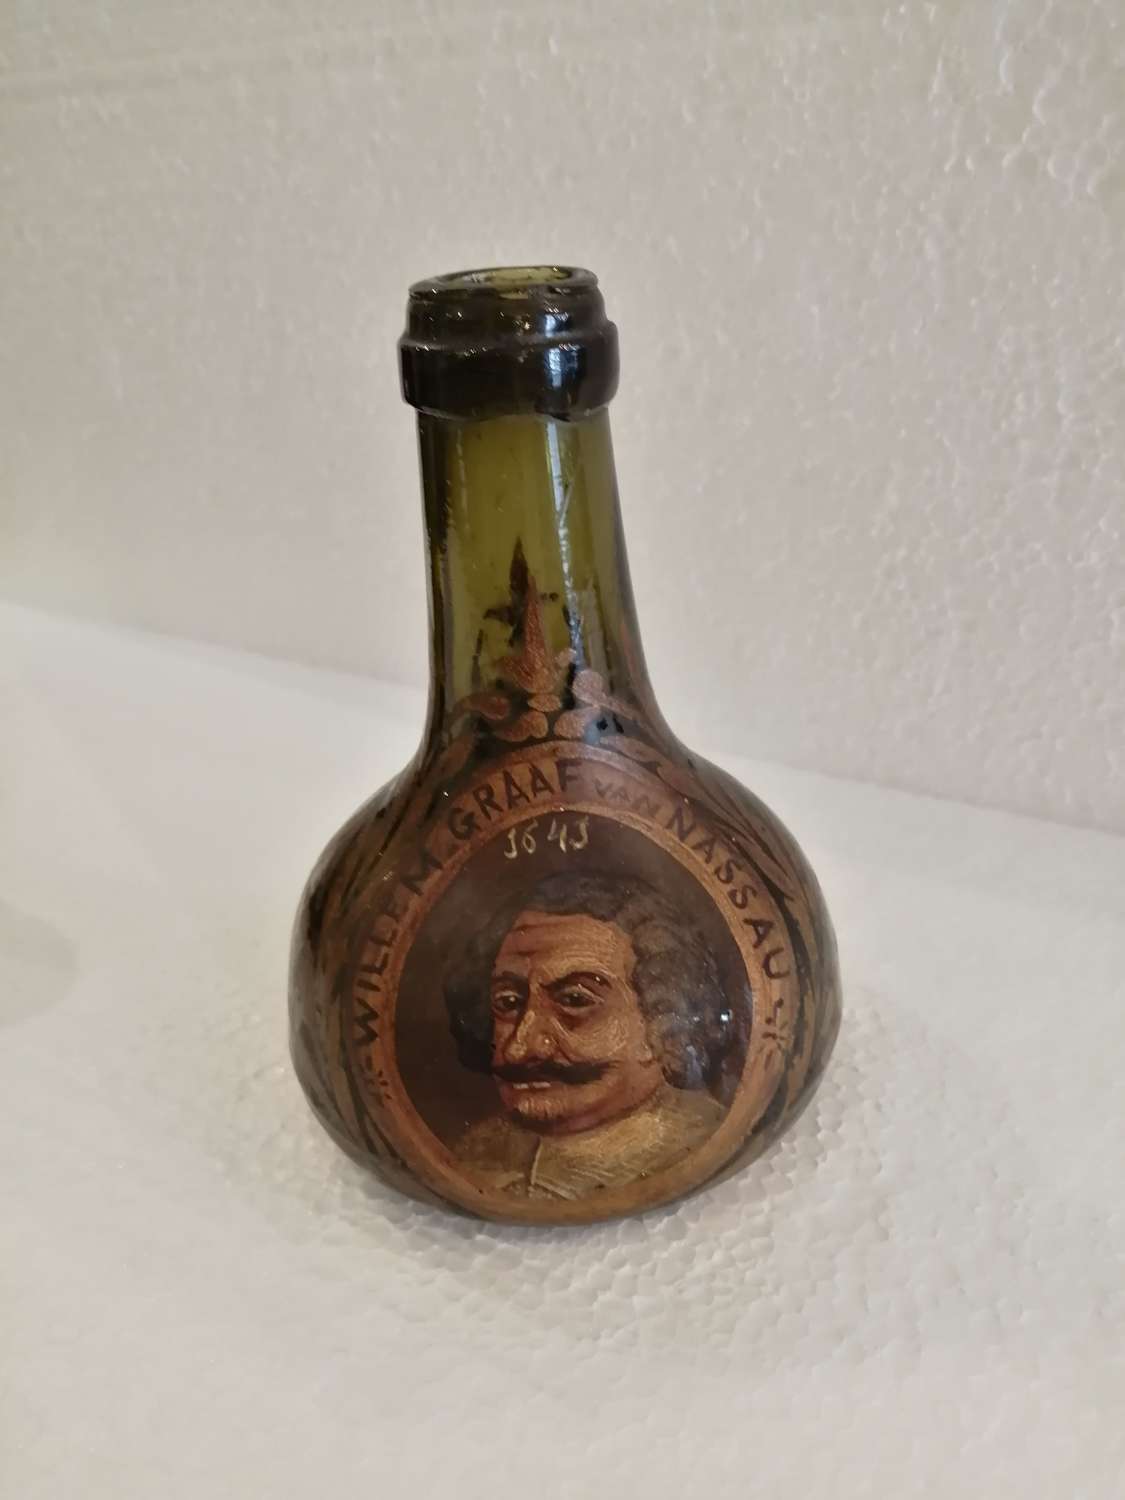 A rare 19th century Dutch decorated green bottle